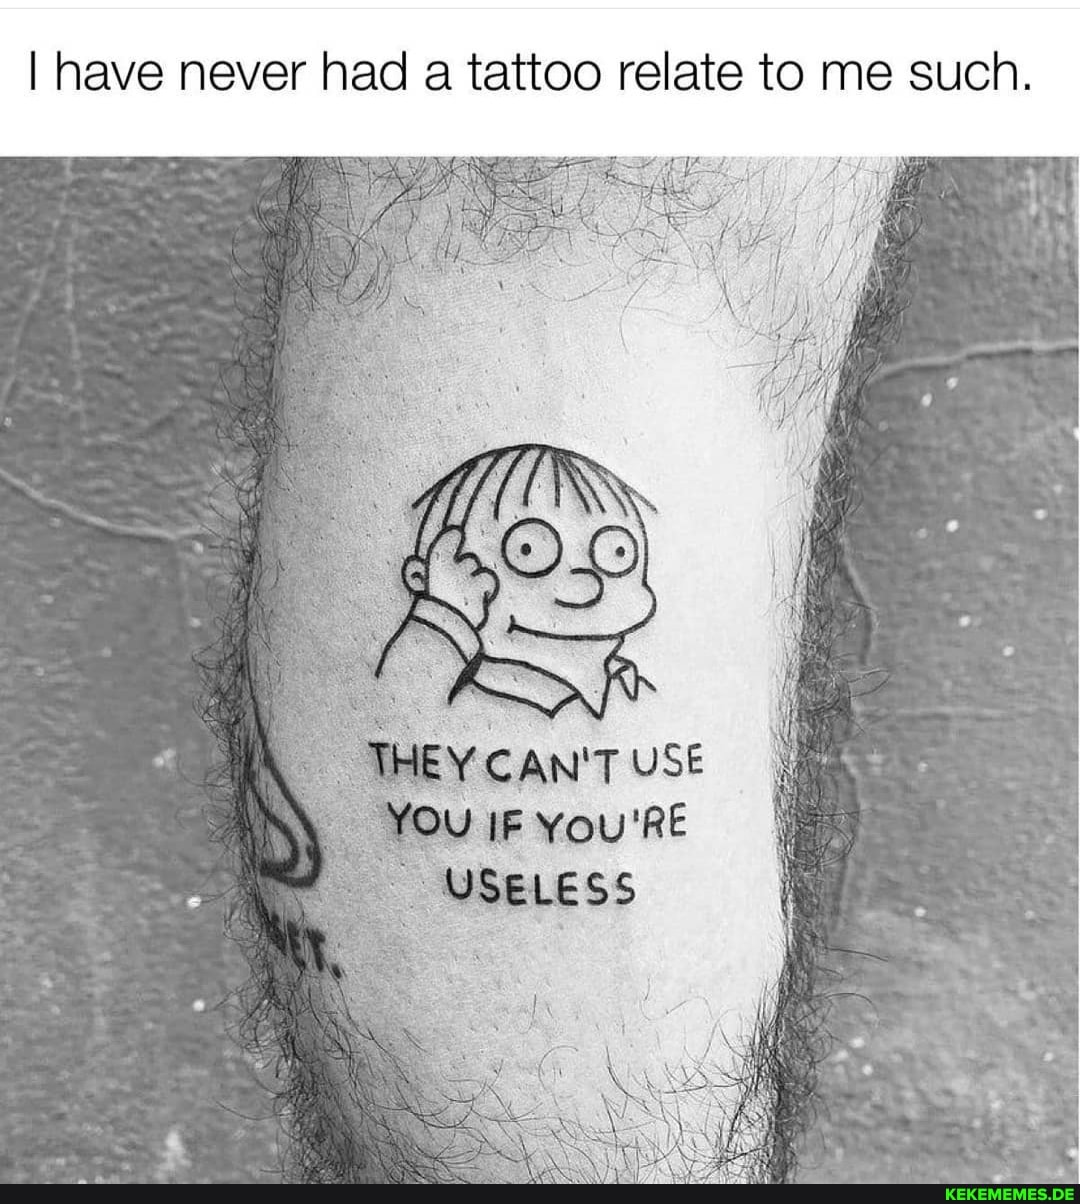 I have never had a tattoo relate to me such. THEY CAN'T USE You USELESS